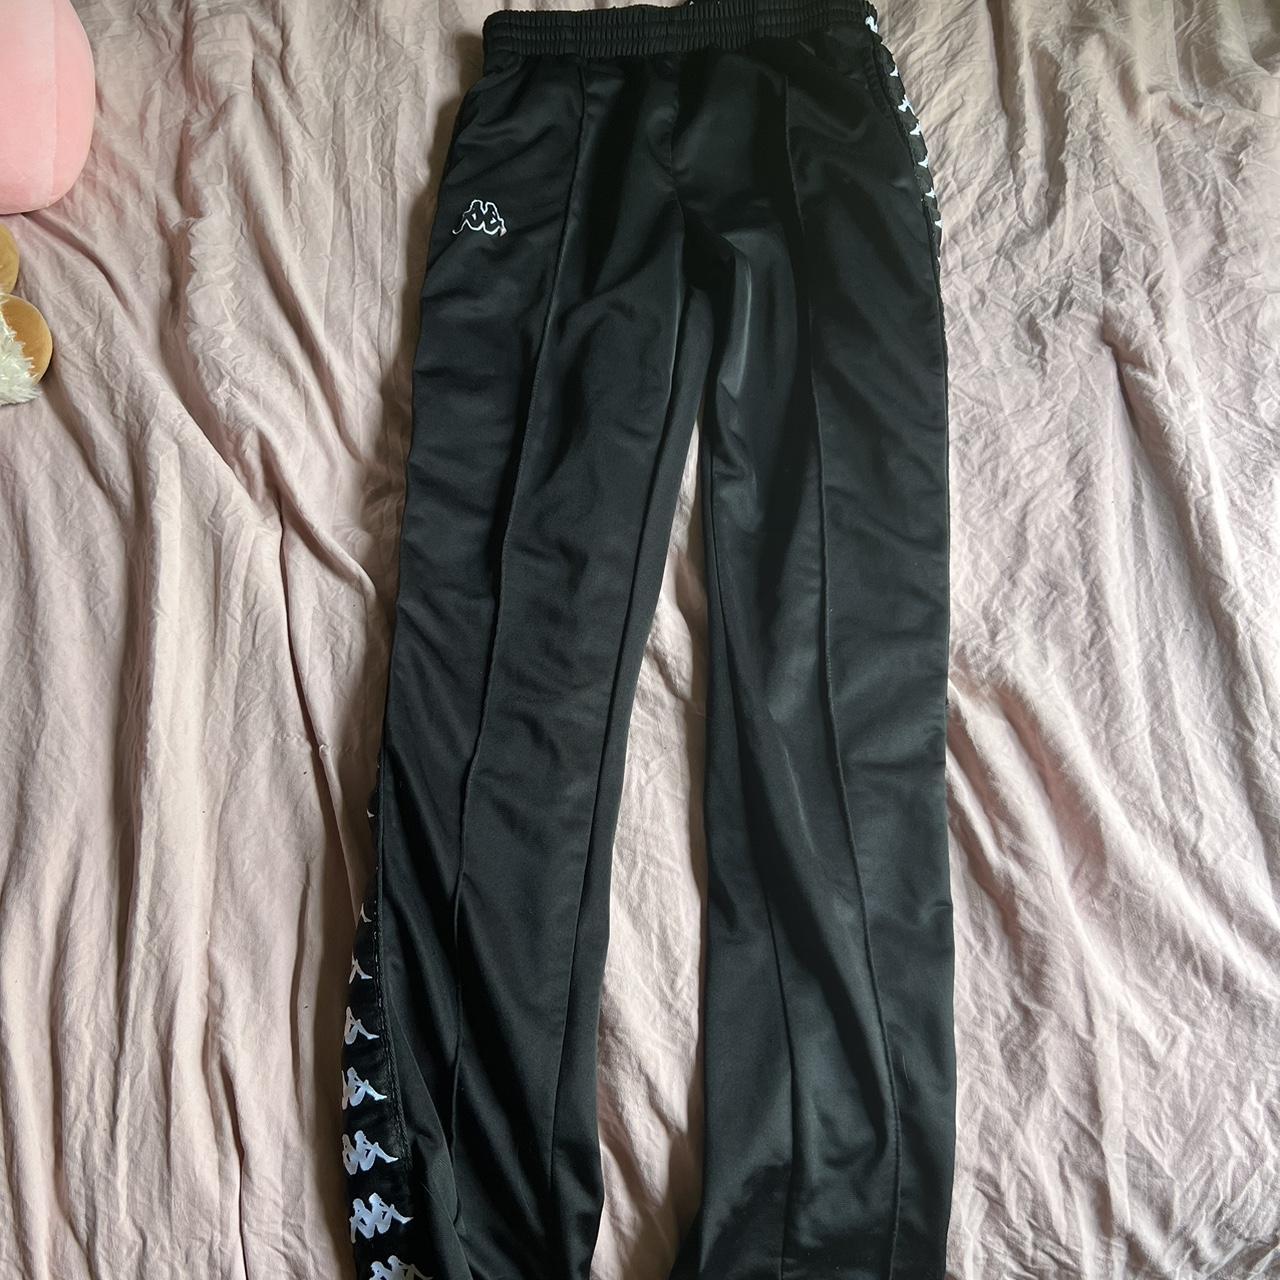 Cute kappa pants says size large but really their... - Depop